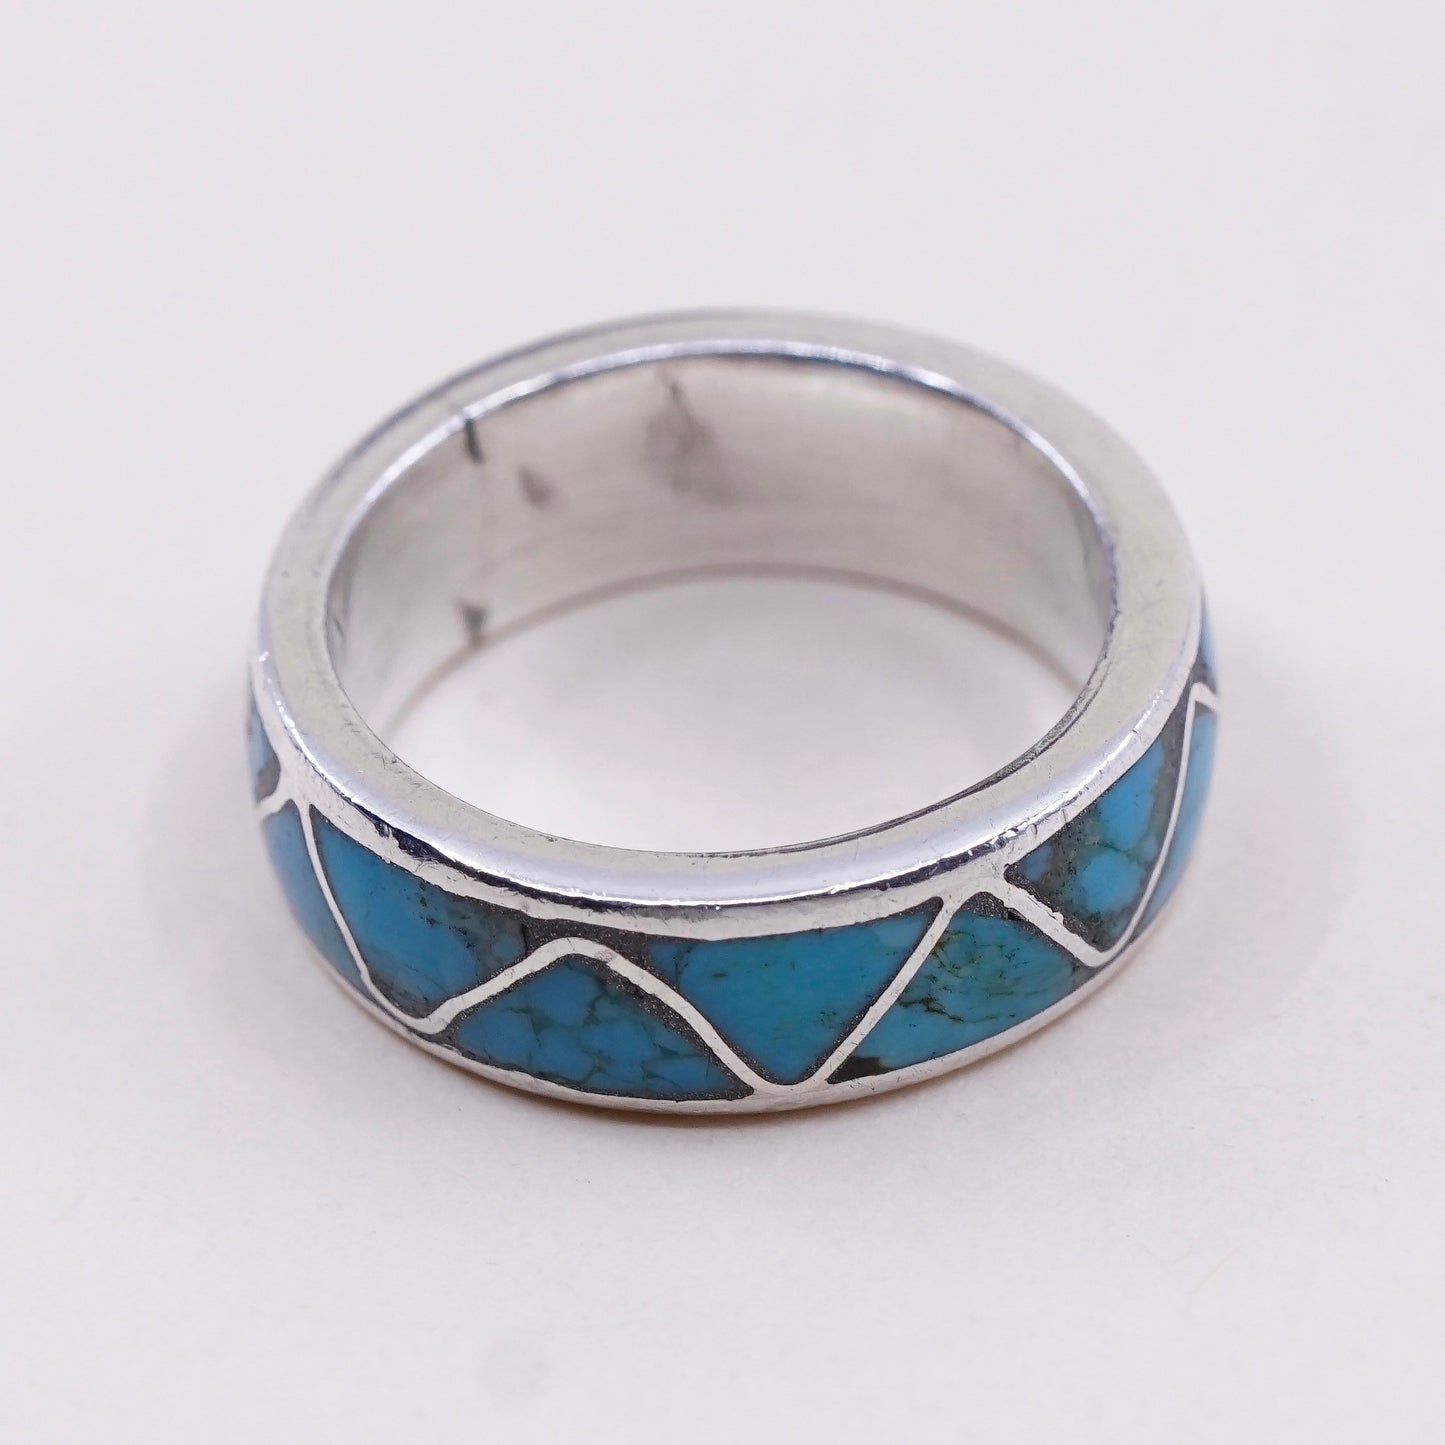 sz 7, navajo James Martin handmade Sterling silver ring, 925 band w/ turquoise